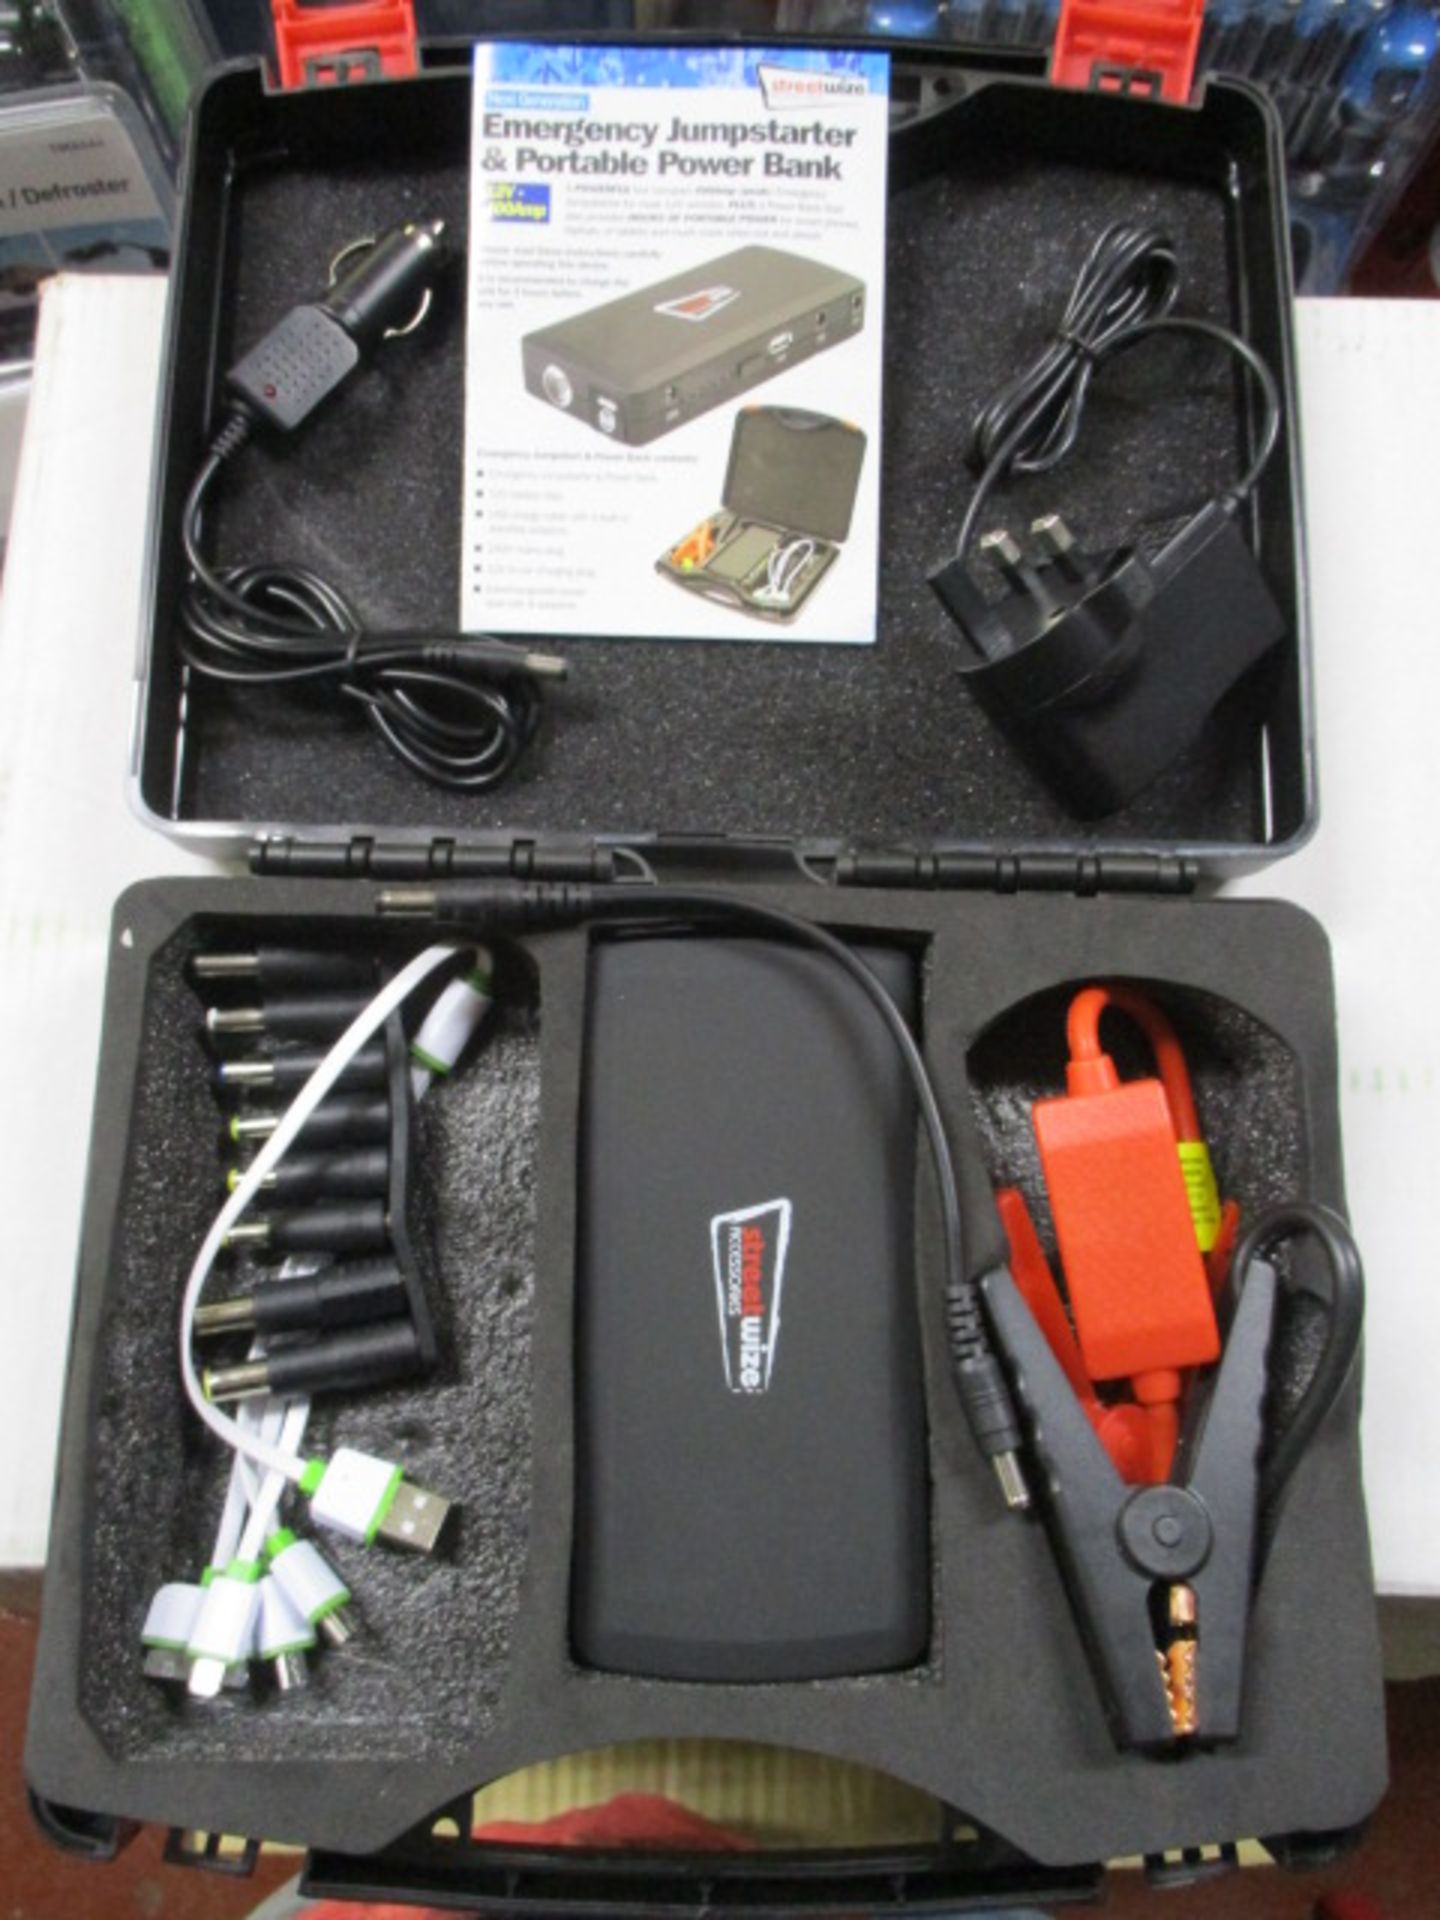 Brand New Streetwize Emergency Jumpstarter & Portable Powerbank 12V-400amp in carry case rrp £79.